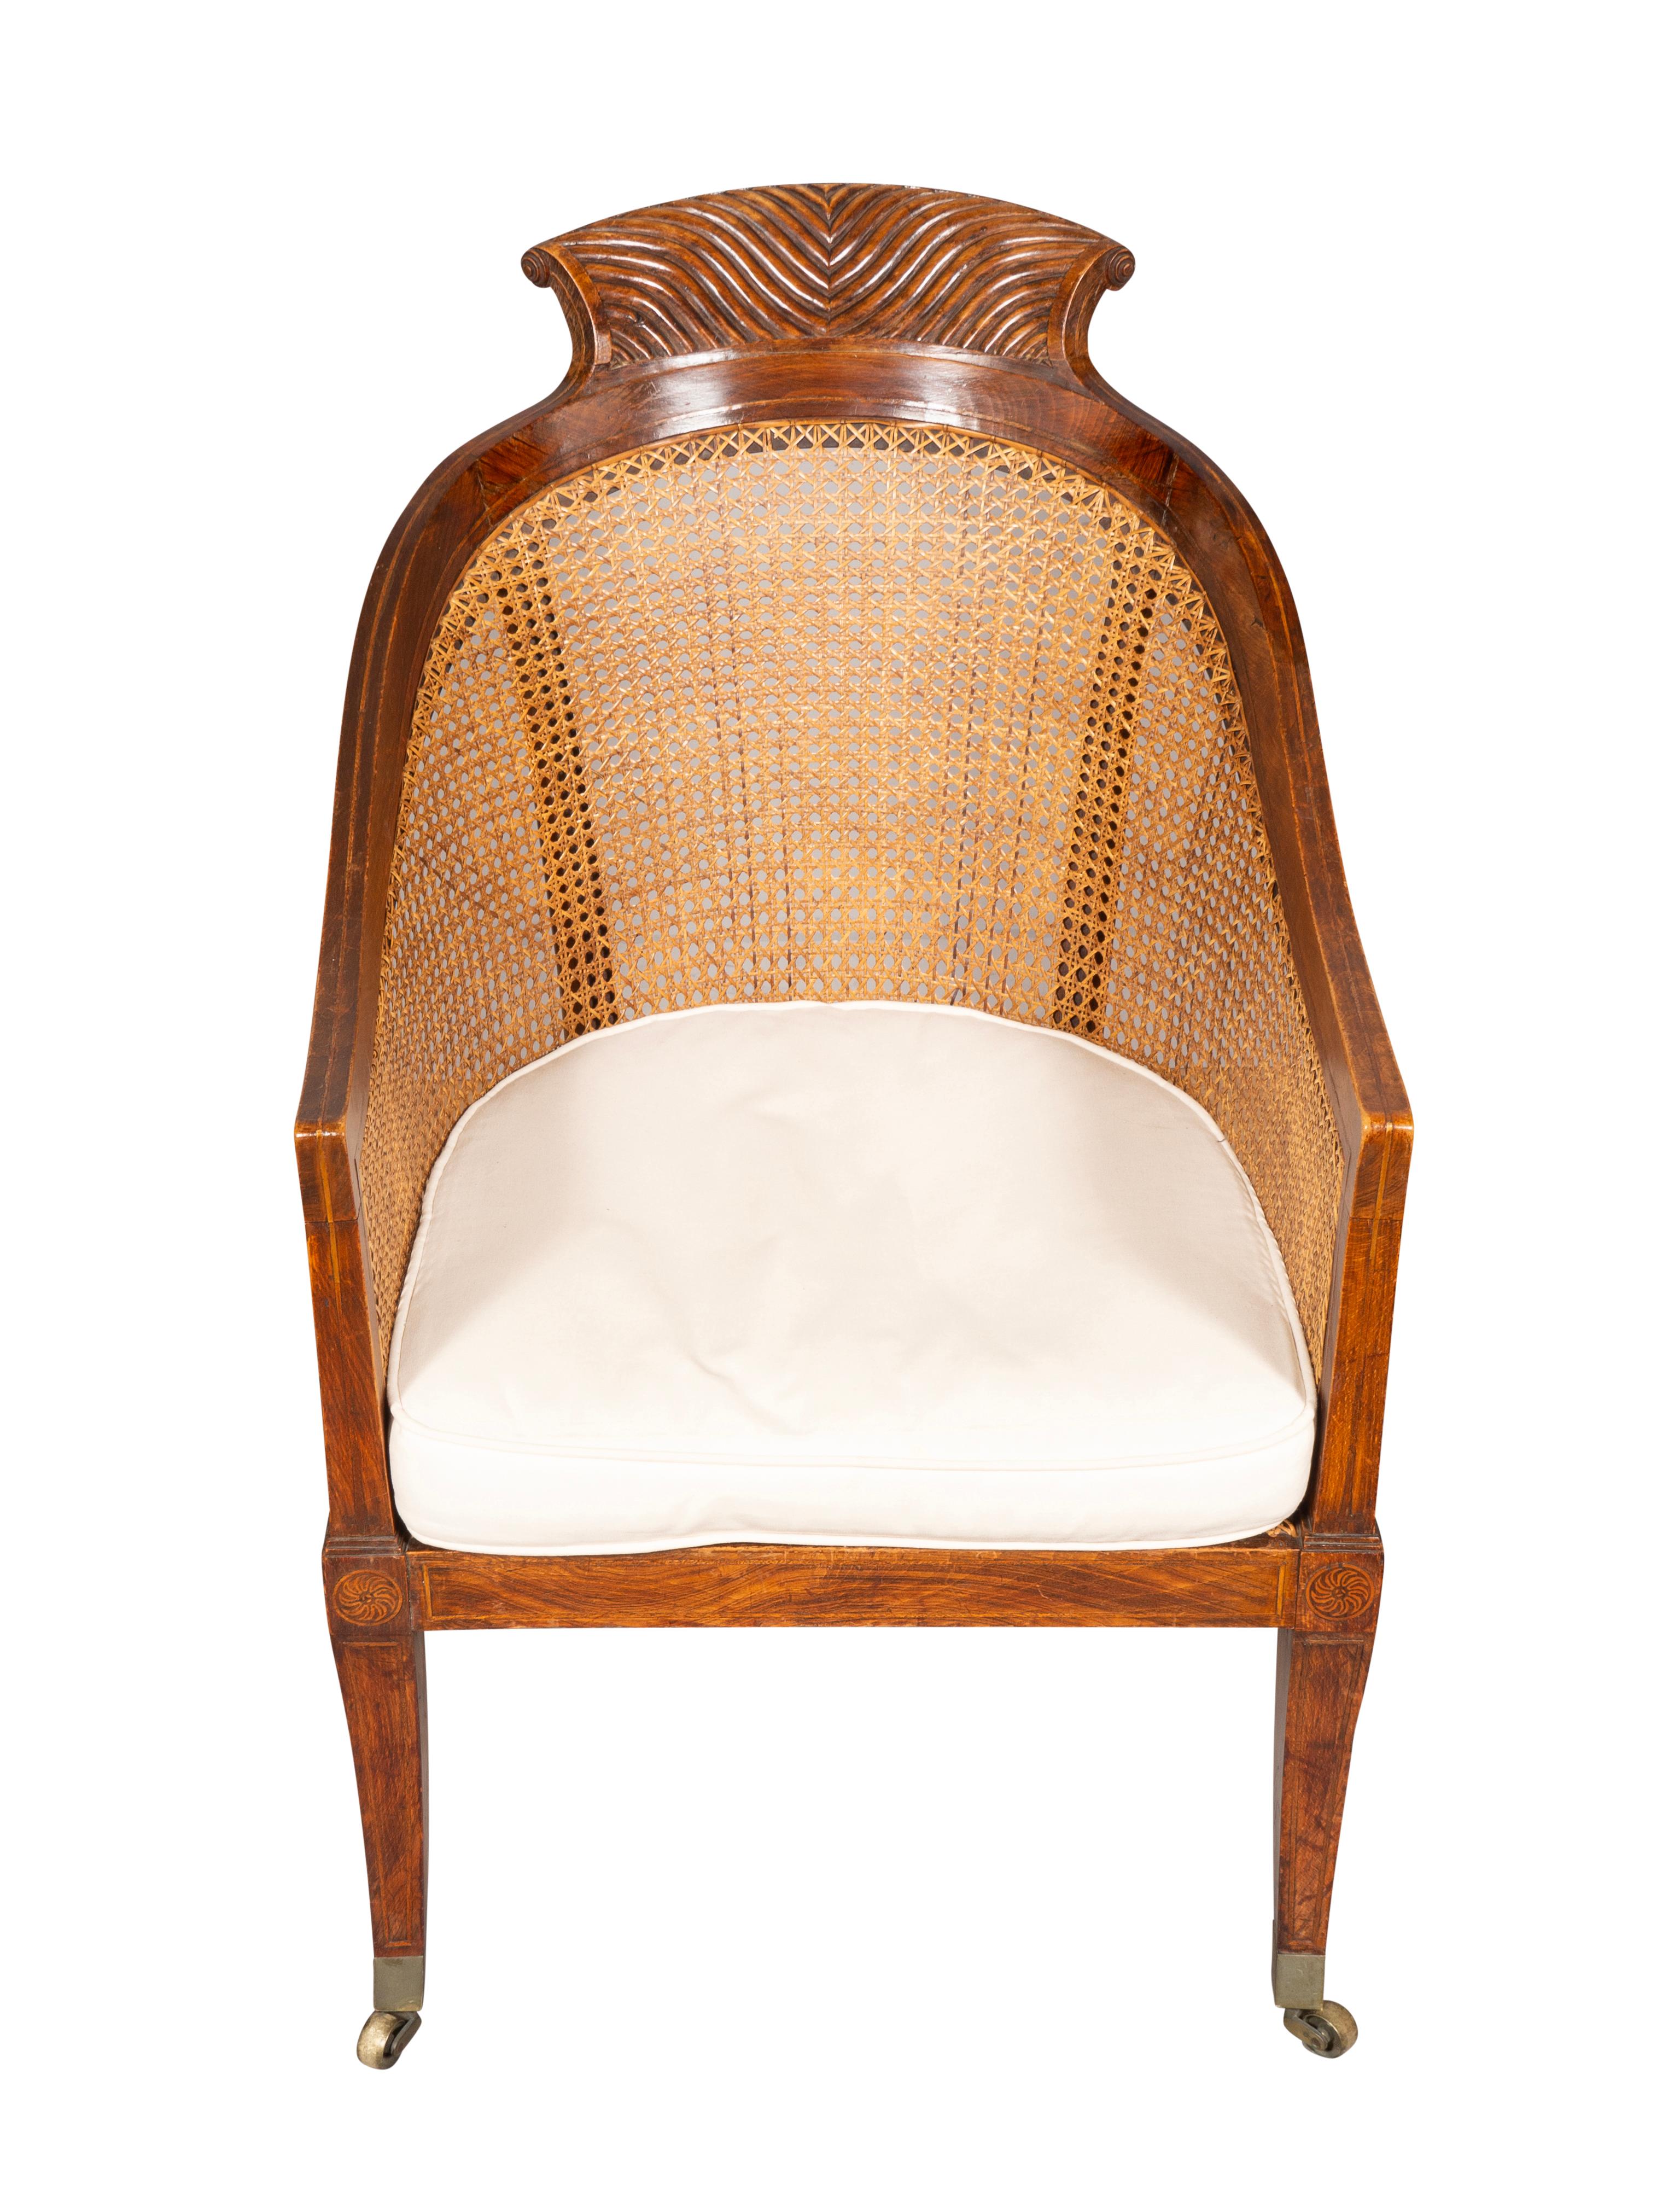 Wit arched crest rail with reeded scrolled carving over a caned back and seat. Down swept arms and saber legs ending on casters. Loose cushion seat.